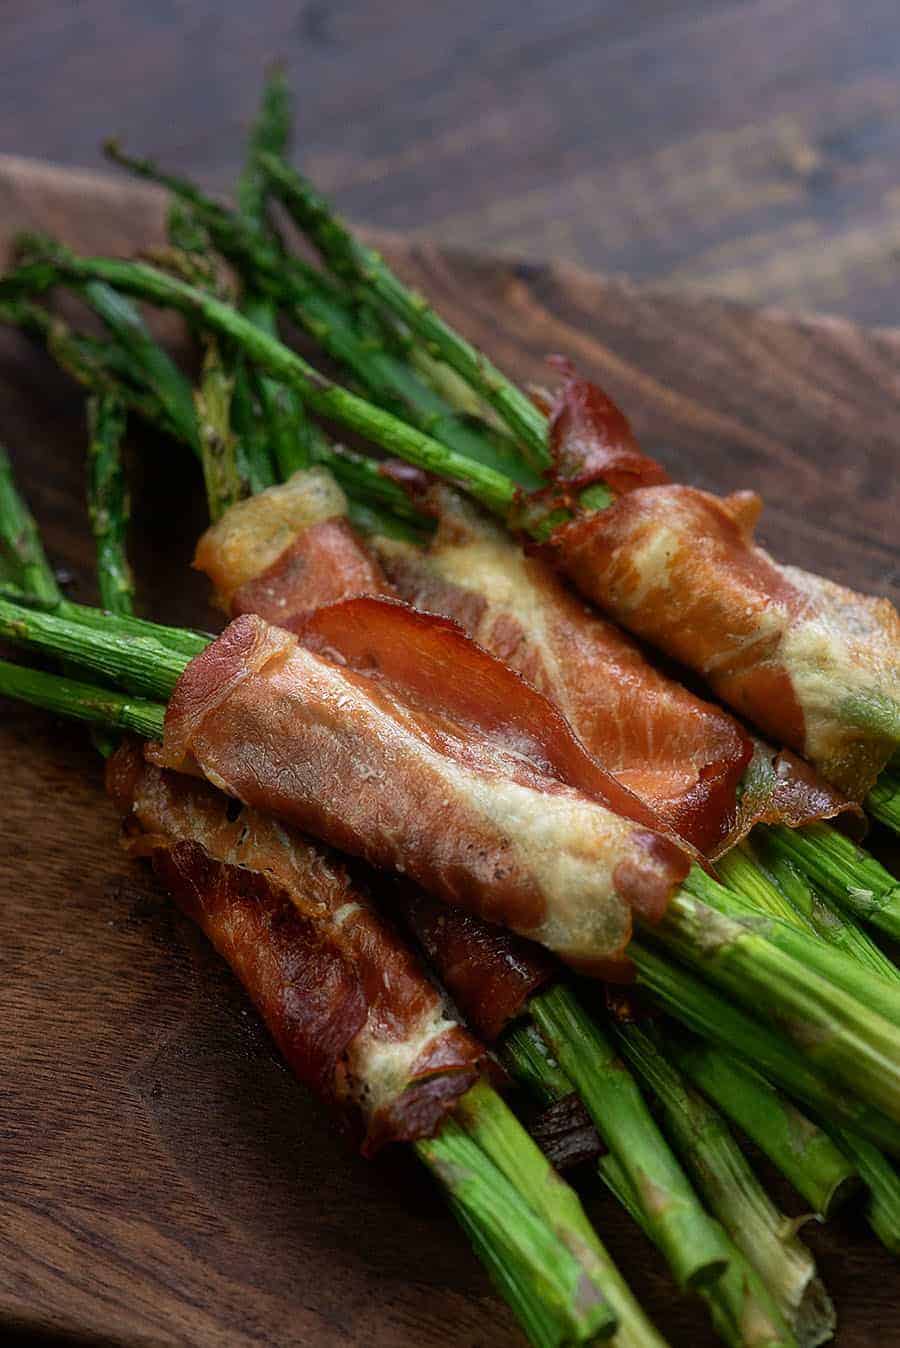 Cooked bacon wrapped asparagus on a cutting board.